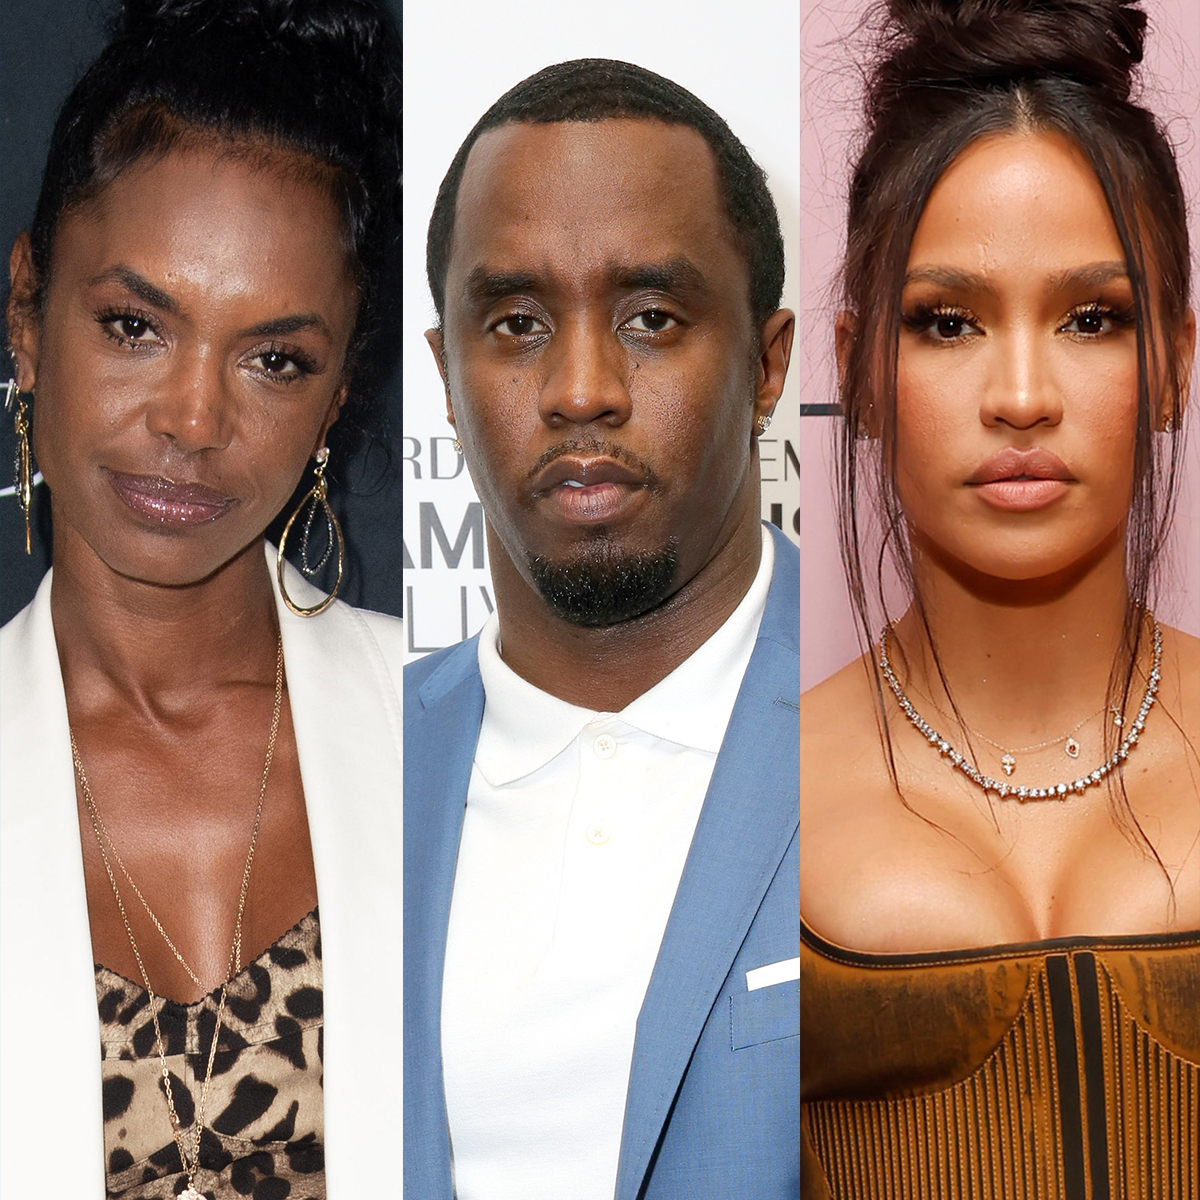 Kim Porter’s Dad Slams “Despicable” Video of Diddy Attacking Ex Cassie